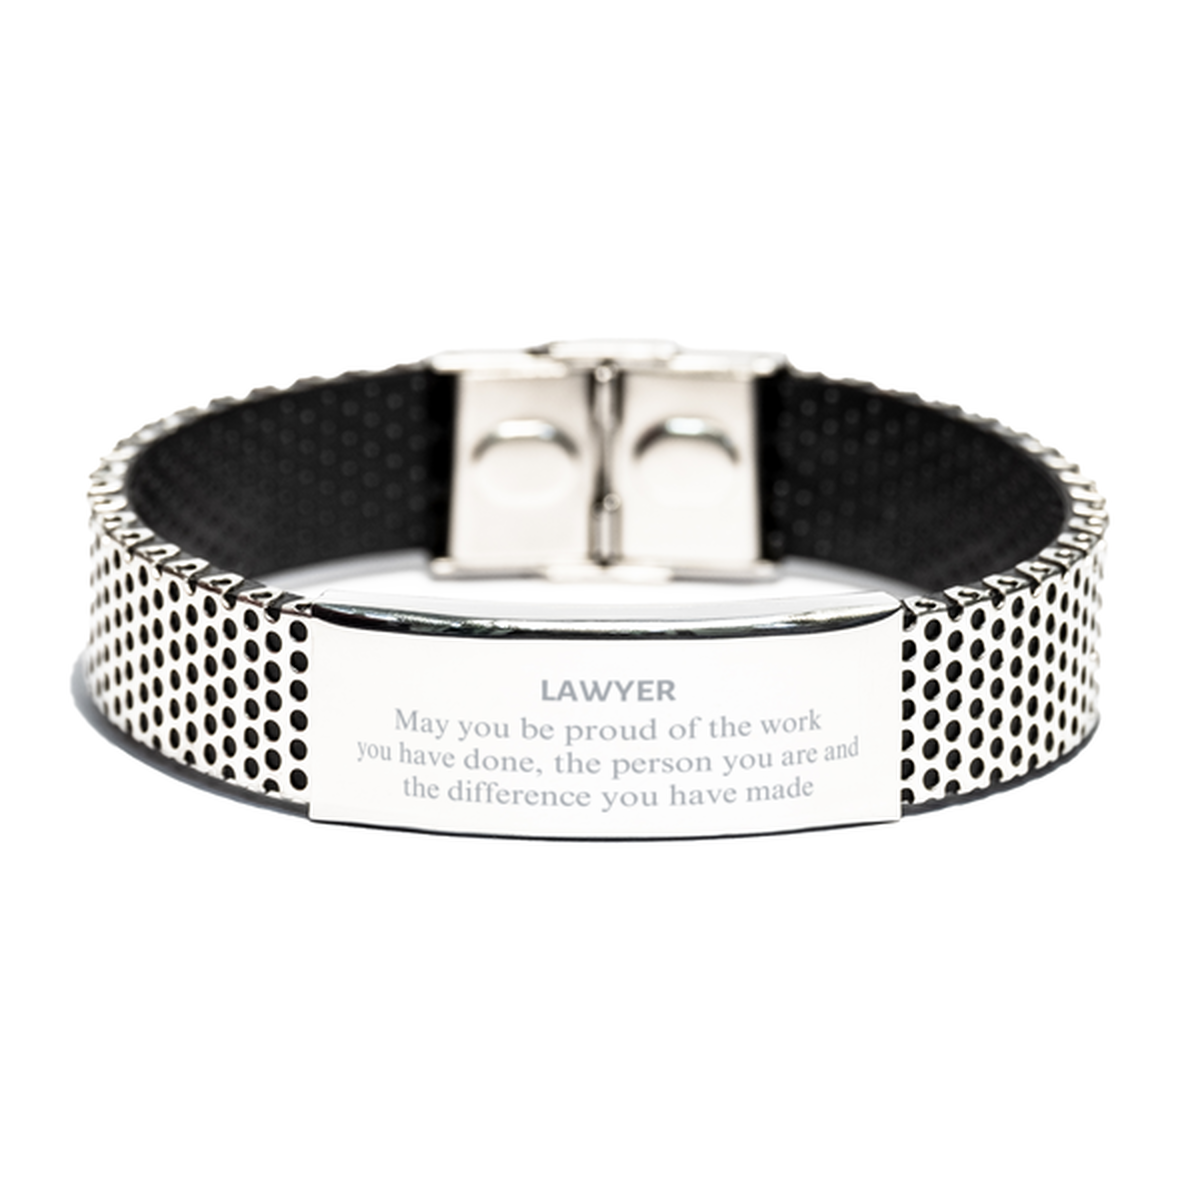 Lawyer May you be proud of the work you have done, Retirement Lawyer Stainless Steel Bracelet for Colleague Appreciation Gifts Amazing for Lawyer